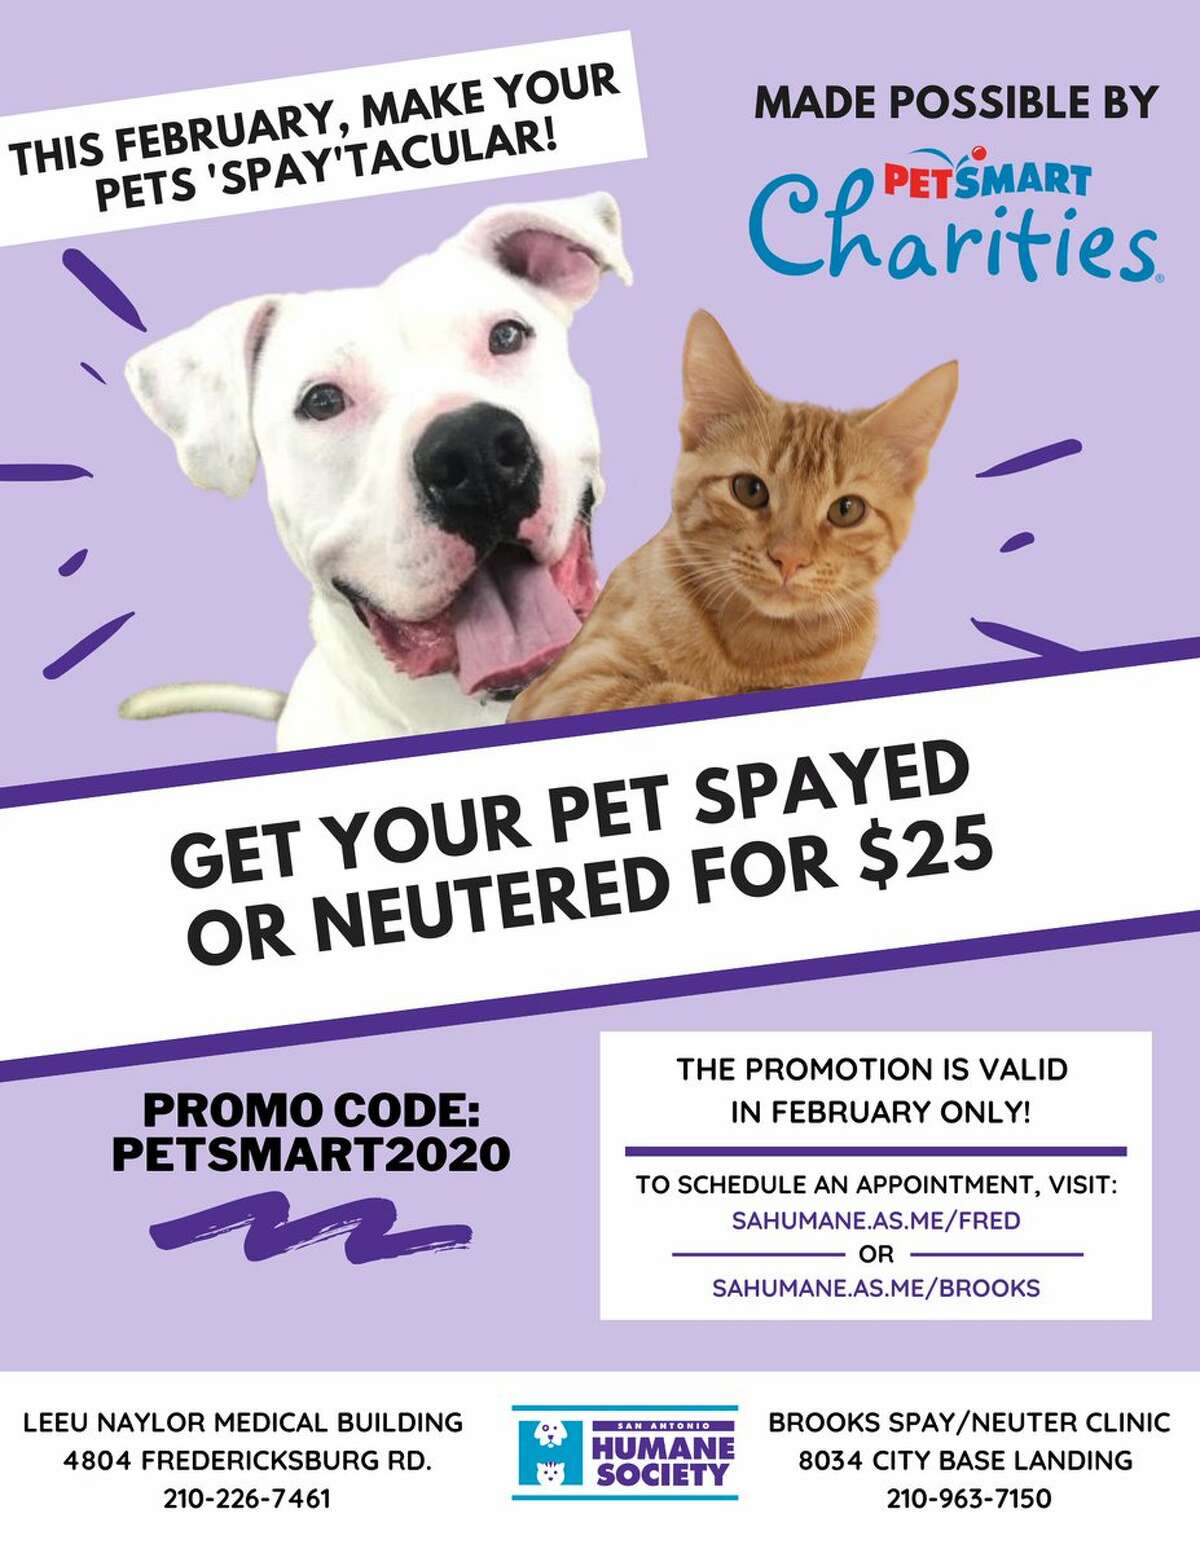 Get Your San Antonio Pets Spayed Or Neutered For Only 25